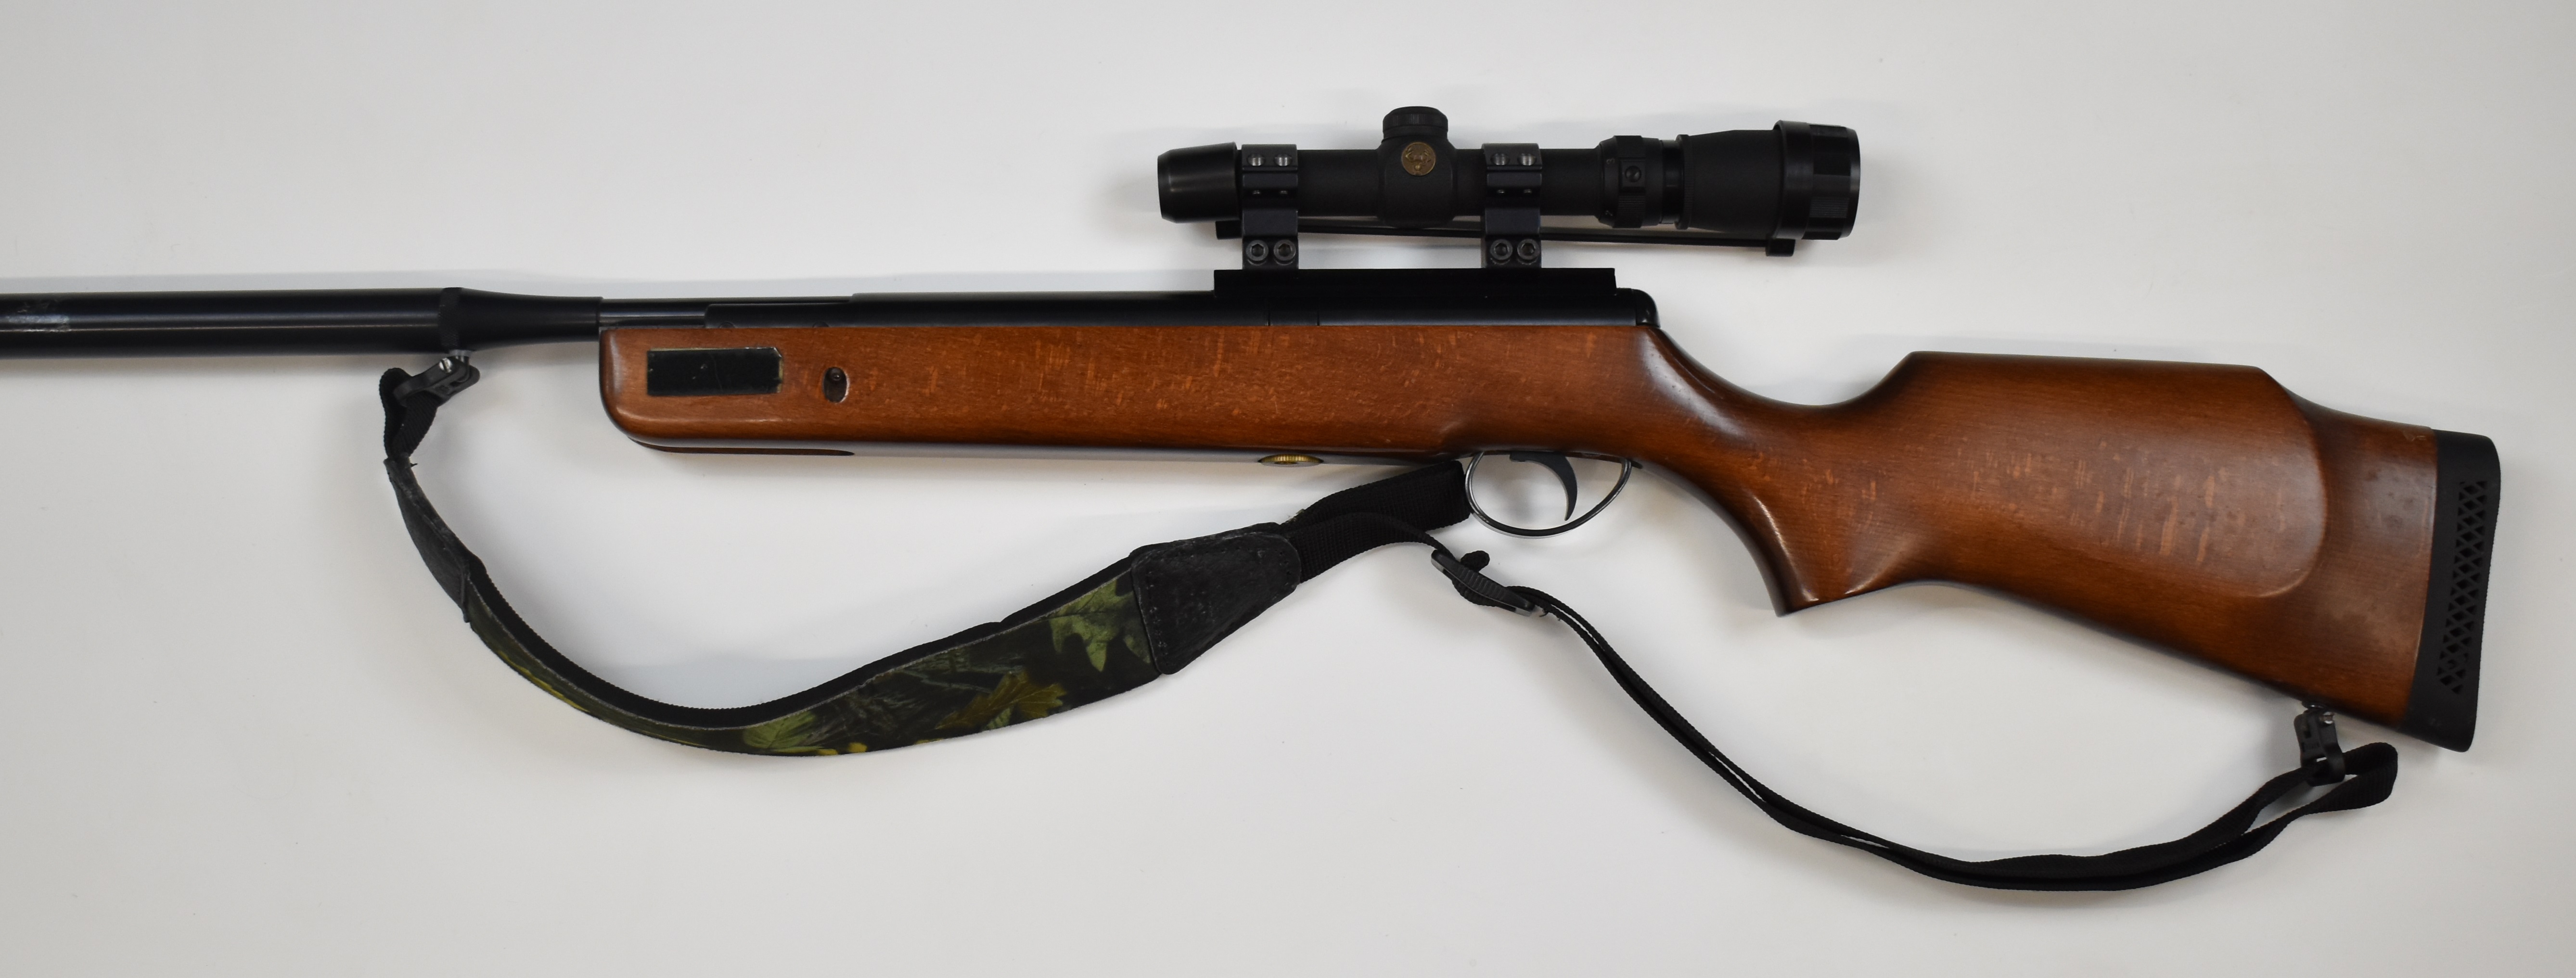 BSA Spitfire .22 air rifle with semi-pistol grip, raised cheek piece, sling, sound moderator and - Image 6 of 9